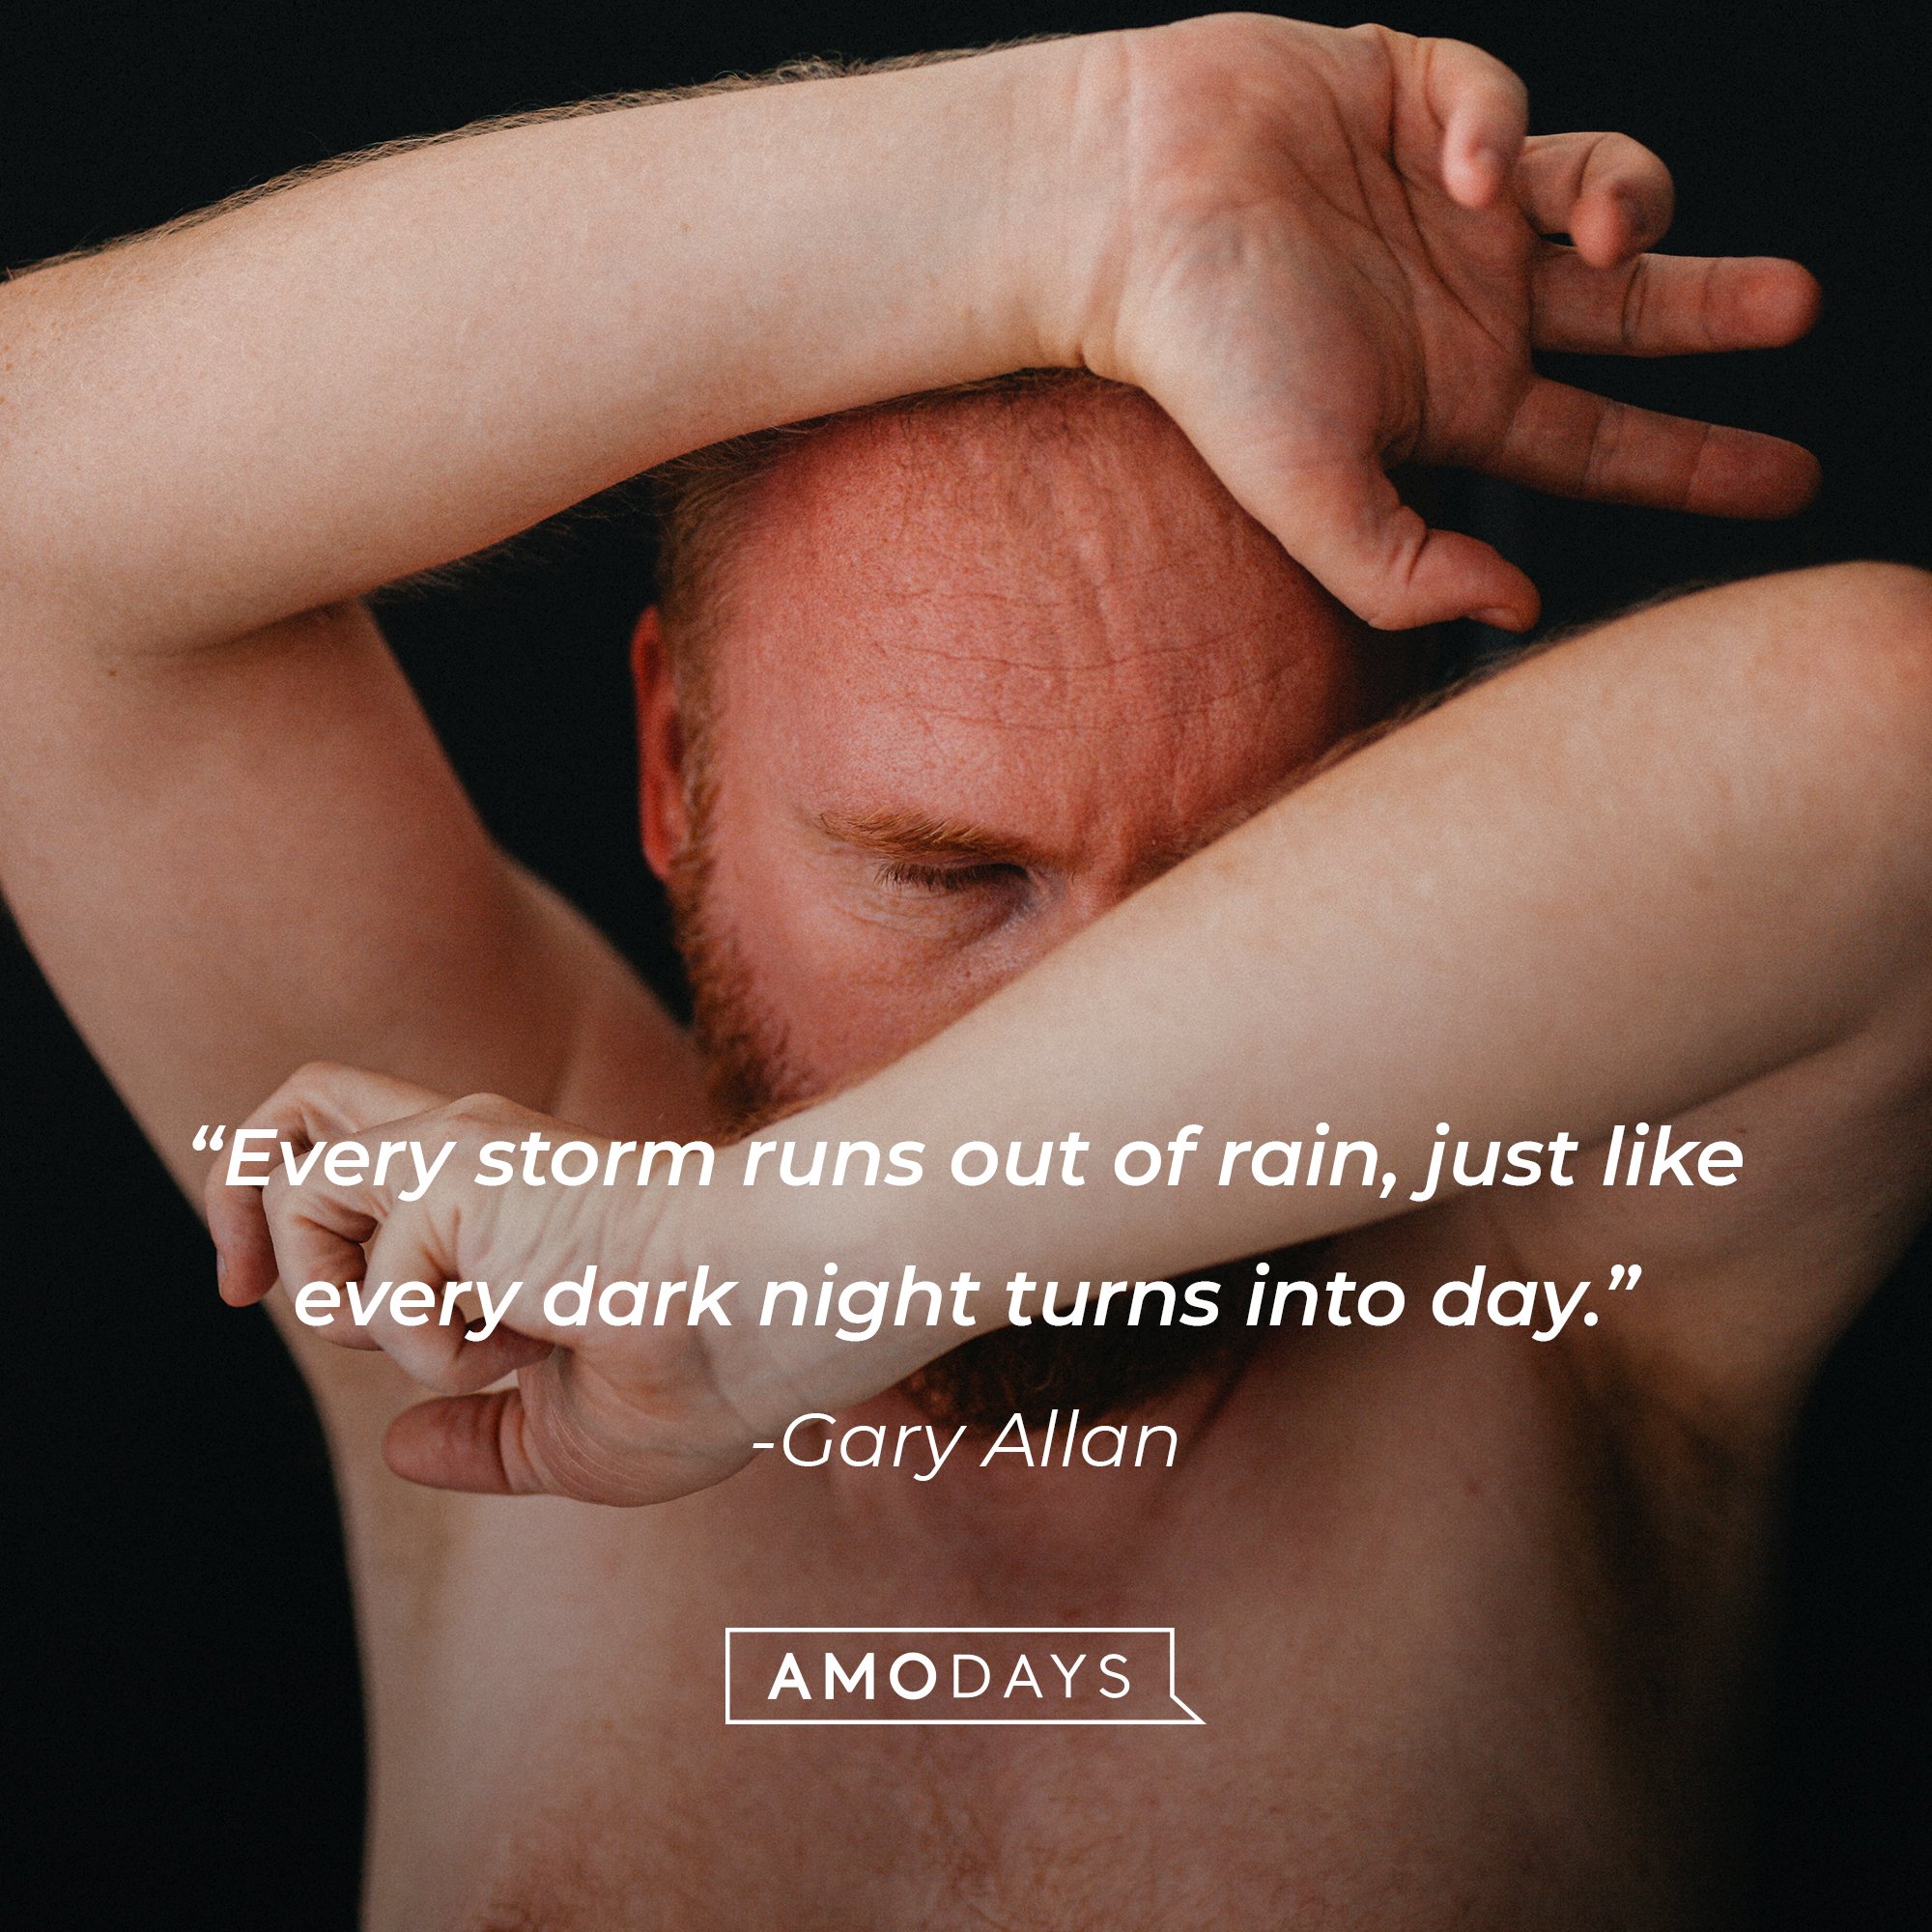 Gary Allan's quote: "Every storm runs out of rain, just like every dark night turns into day." | Image: AmoDays